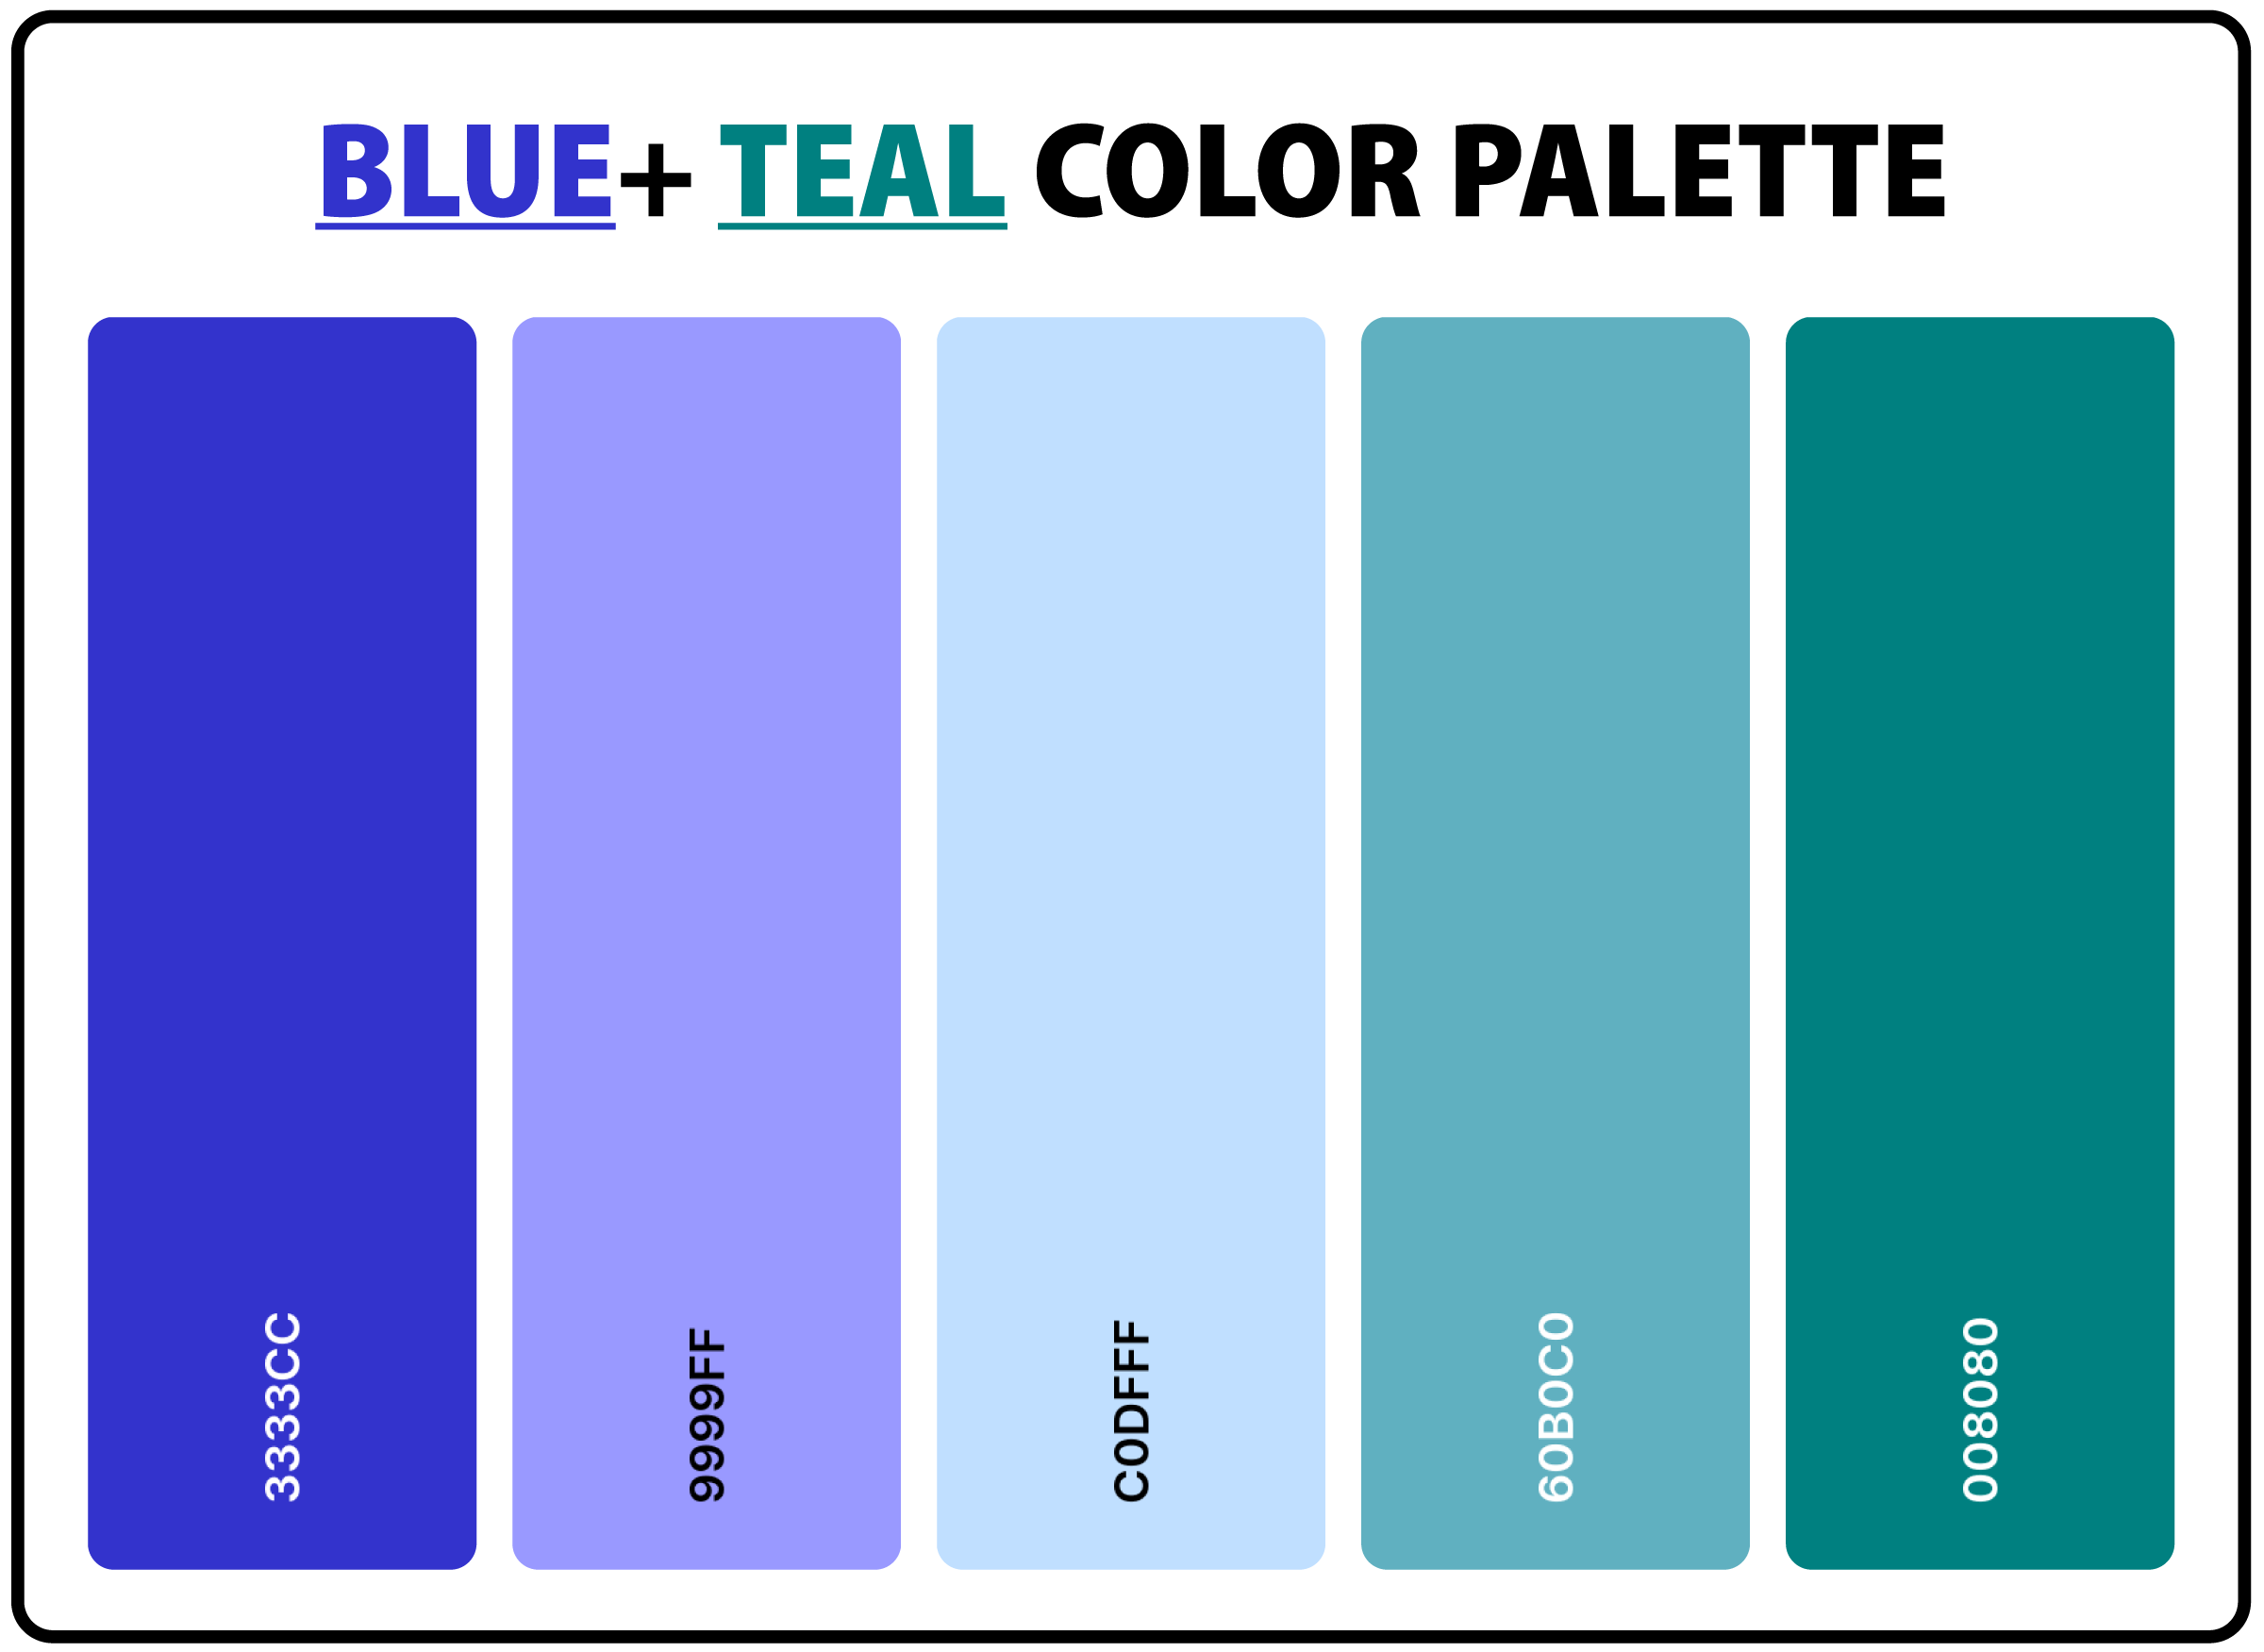 Blue-and-Teal-Color-Palette-with-Hex-Codes